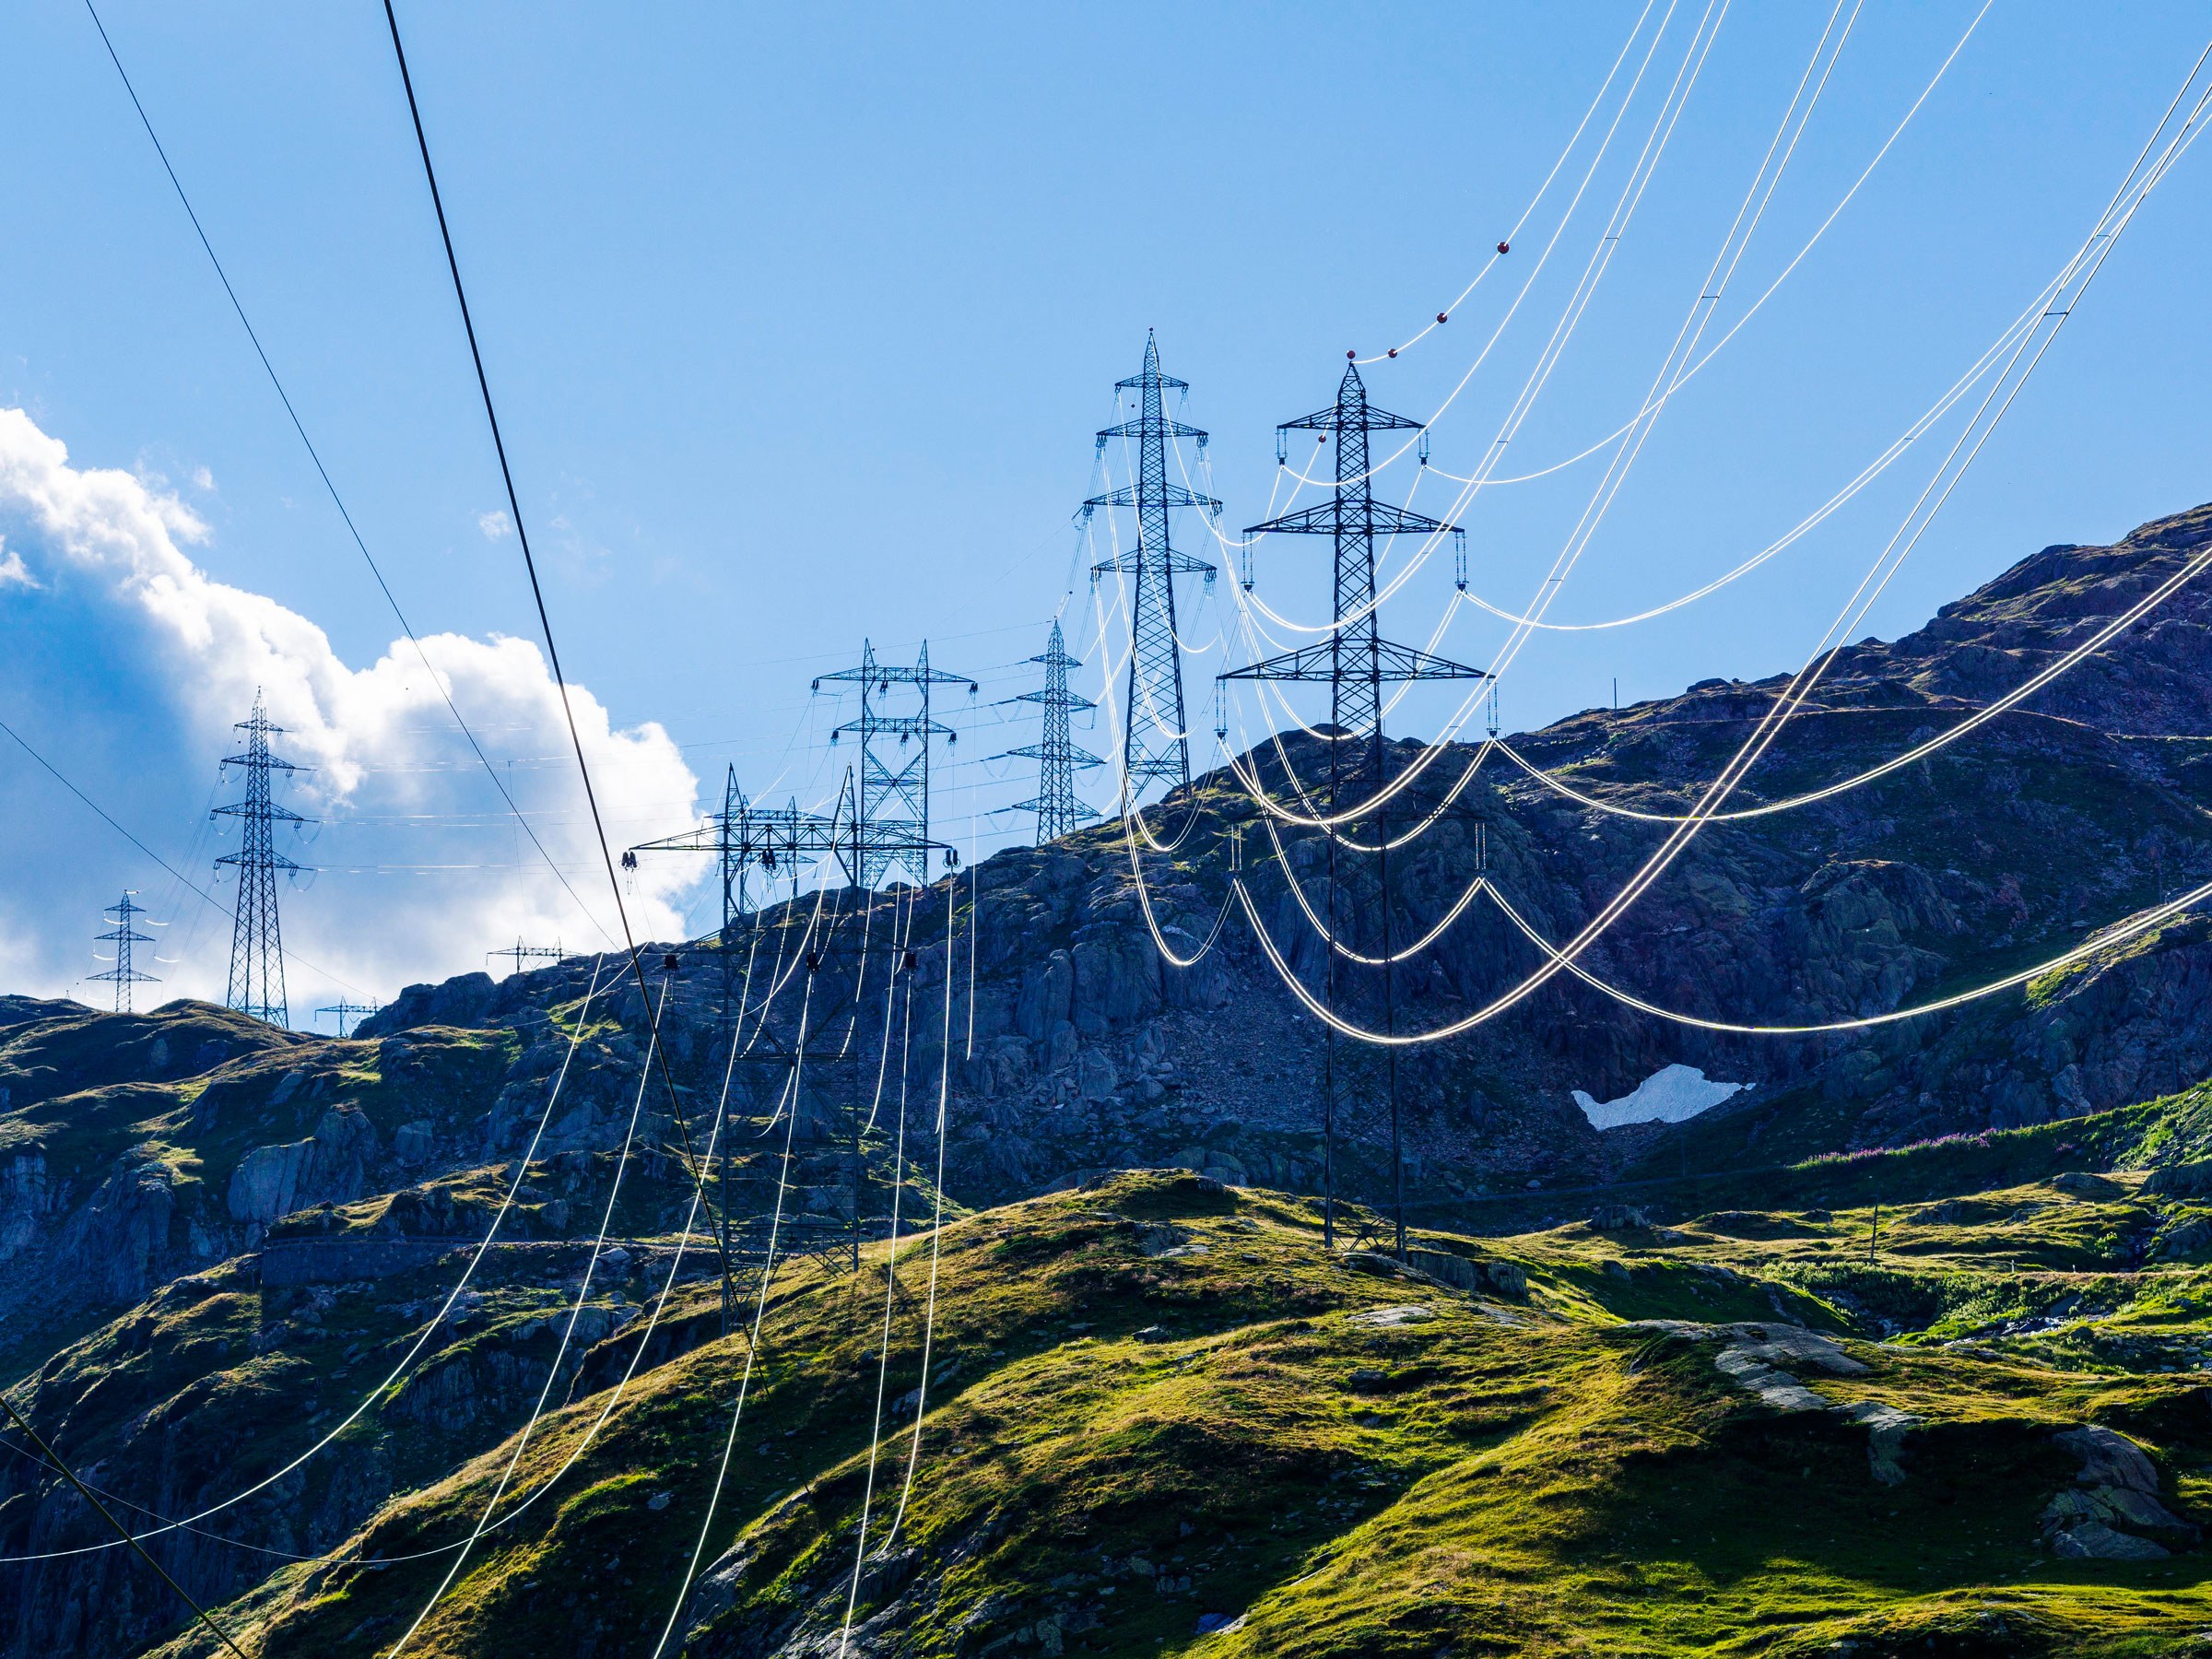 Let's Do the Shocking Physics of Why Power Lines Sag | WIRED